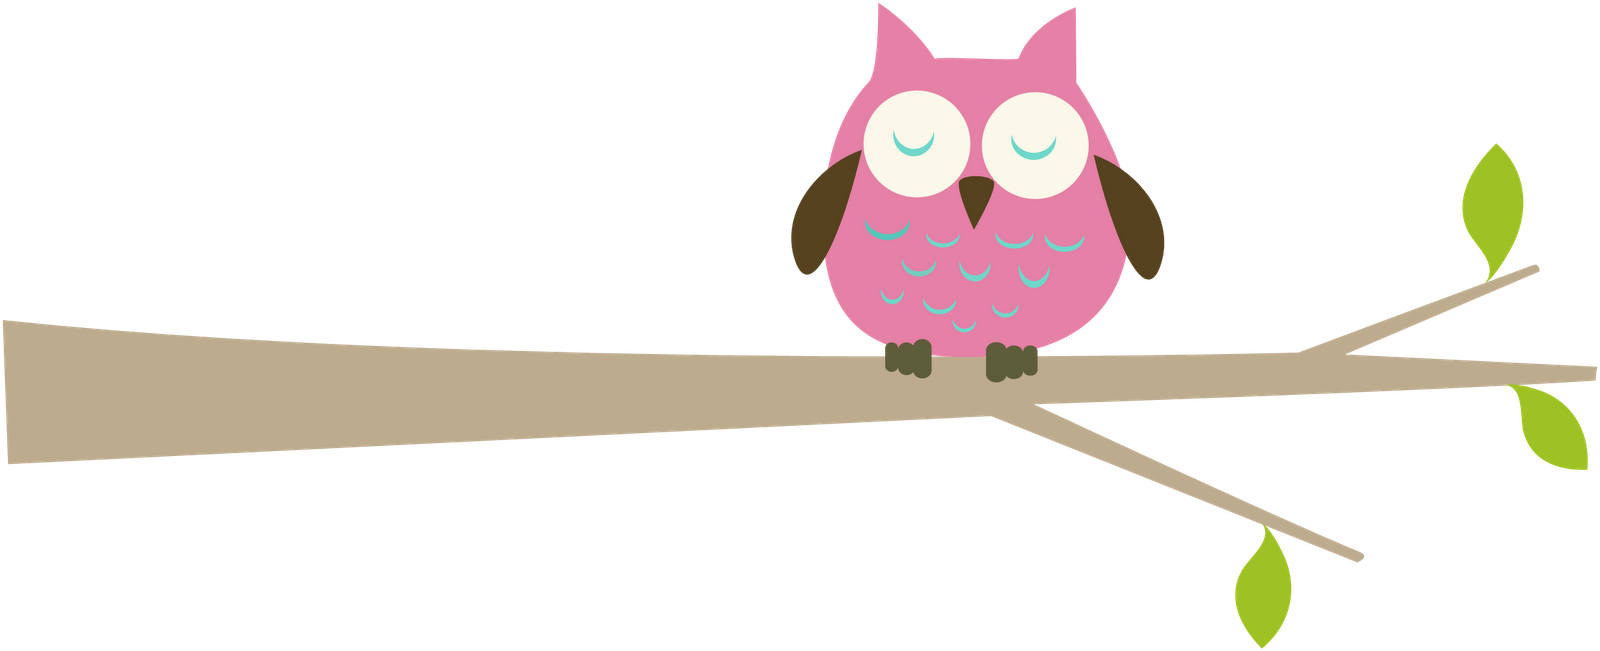 Pink Owl On Branch Images & Pictures - Becuo